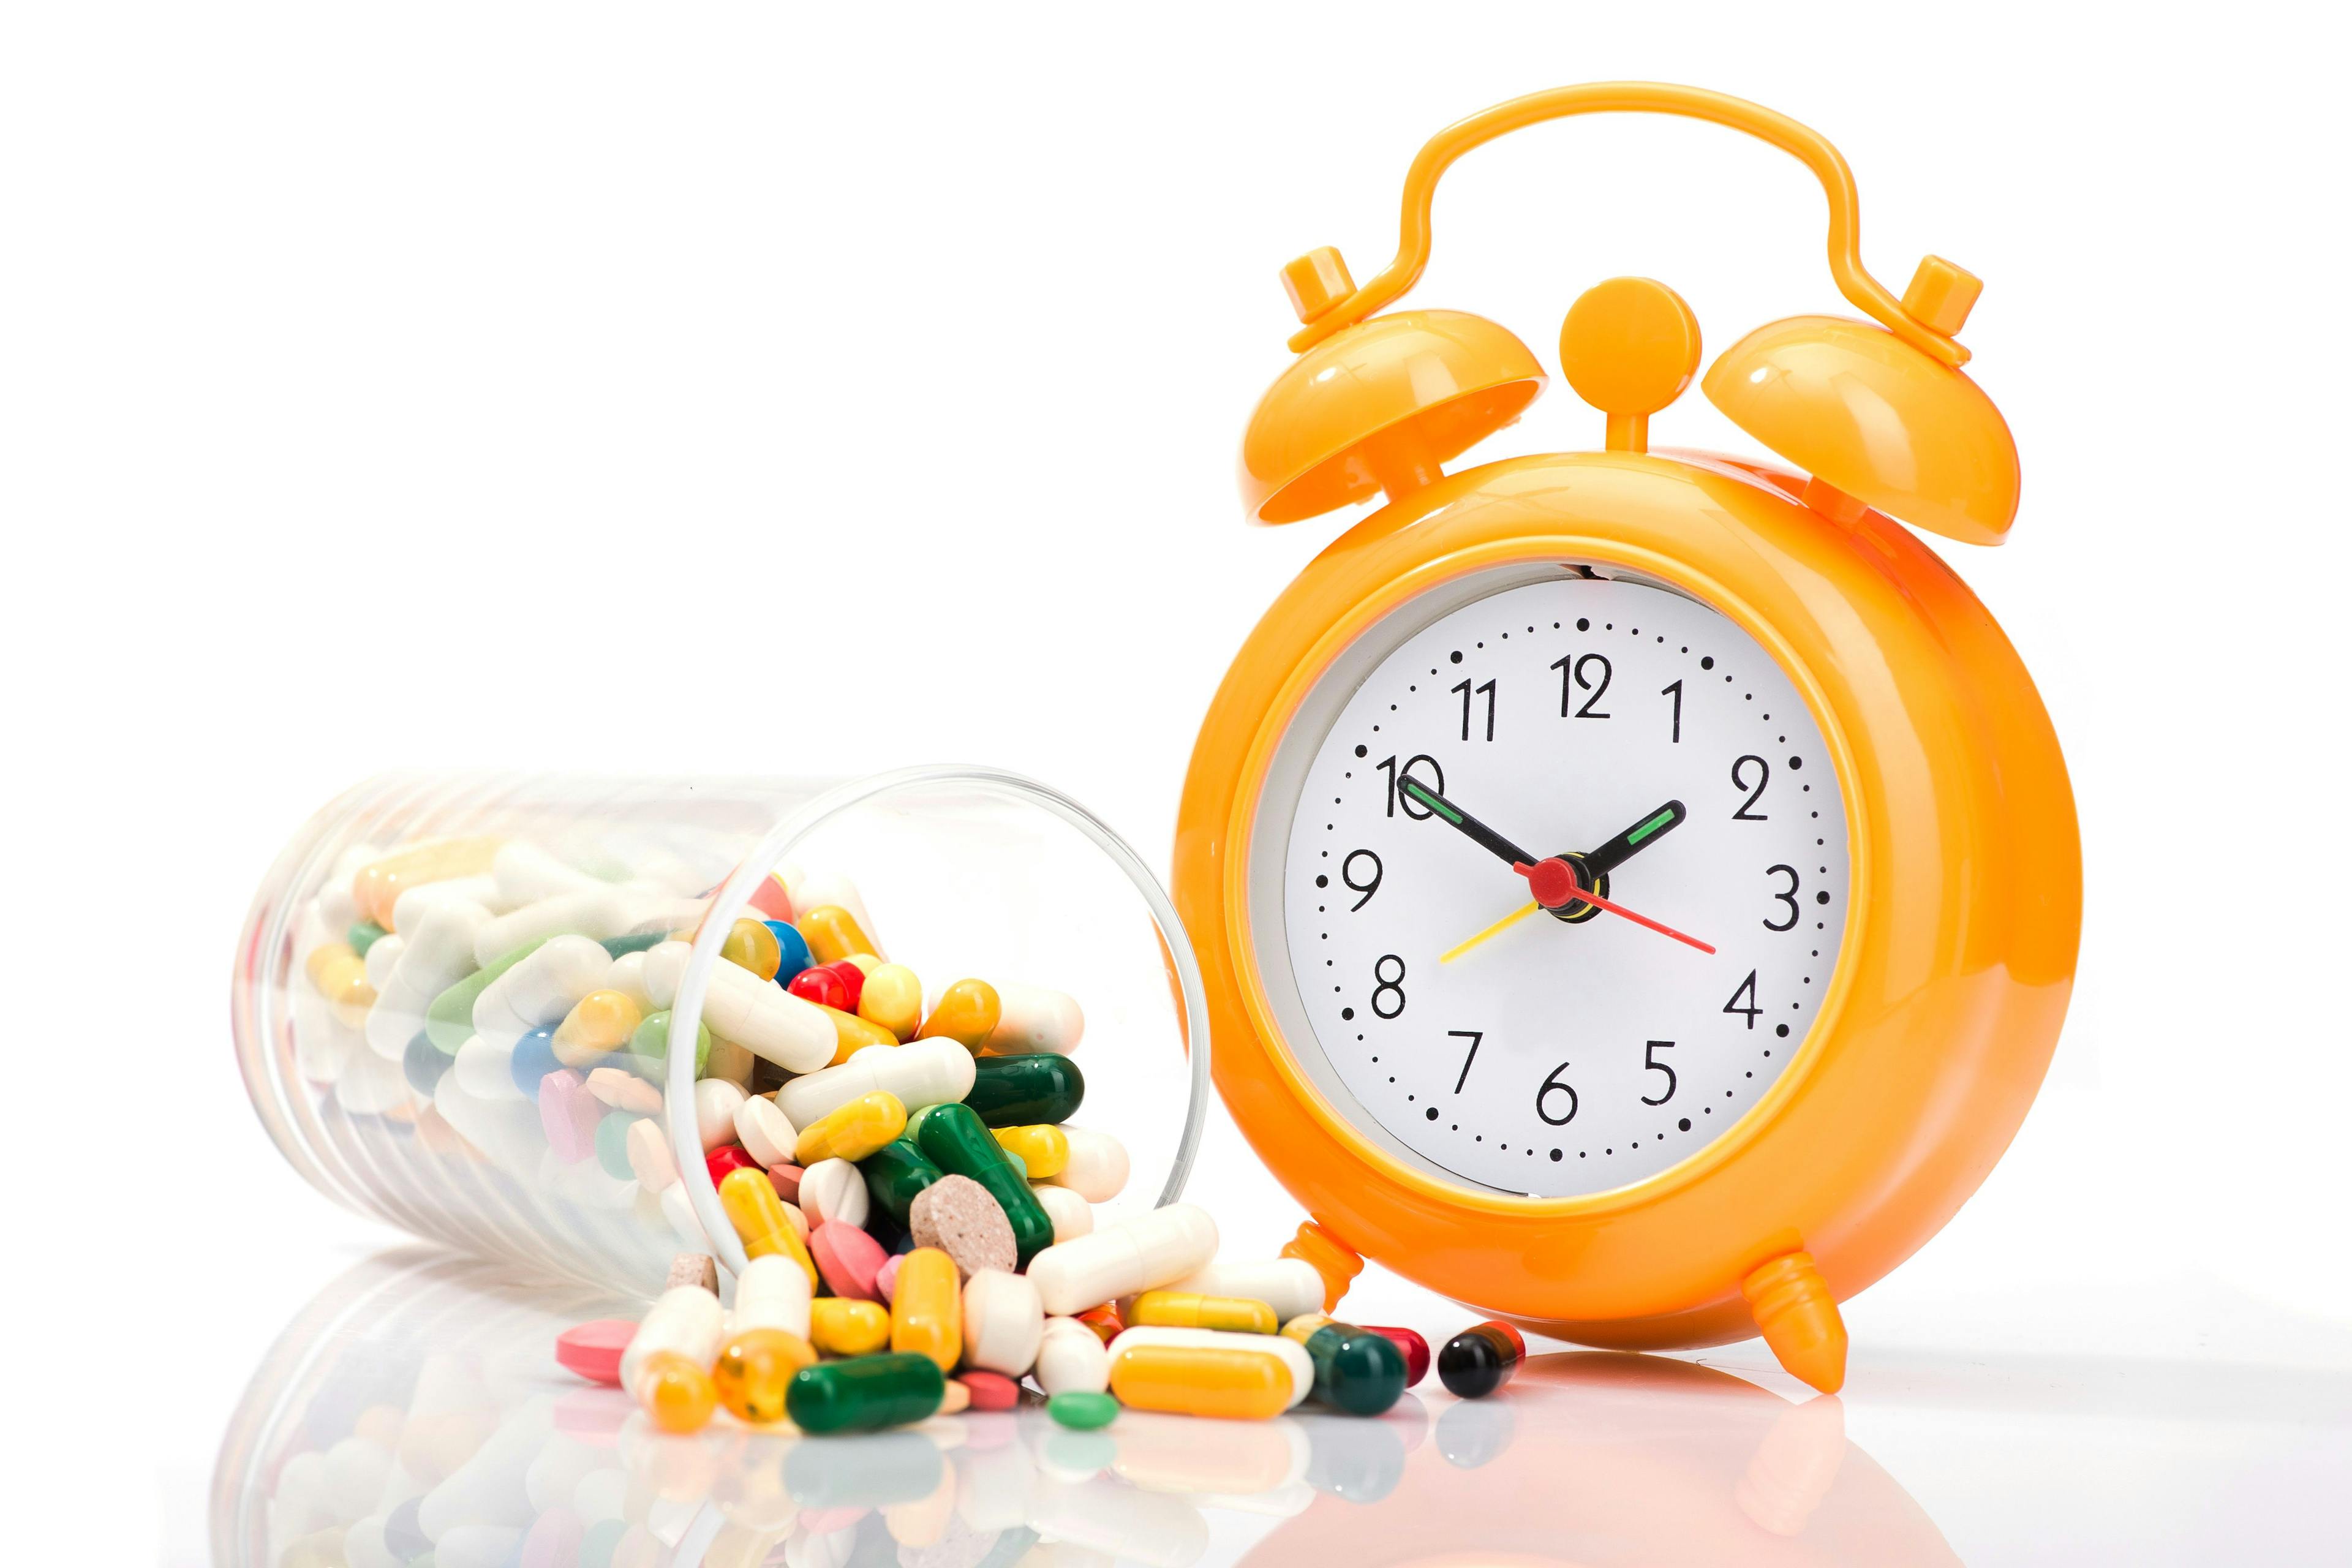 This study analyzed concerns that a lack of time may lead primary care physicians to prescribe unnecessarily as a “quick fix.”